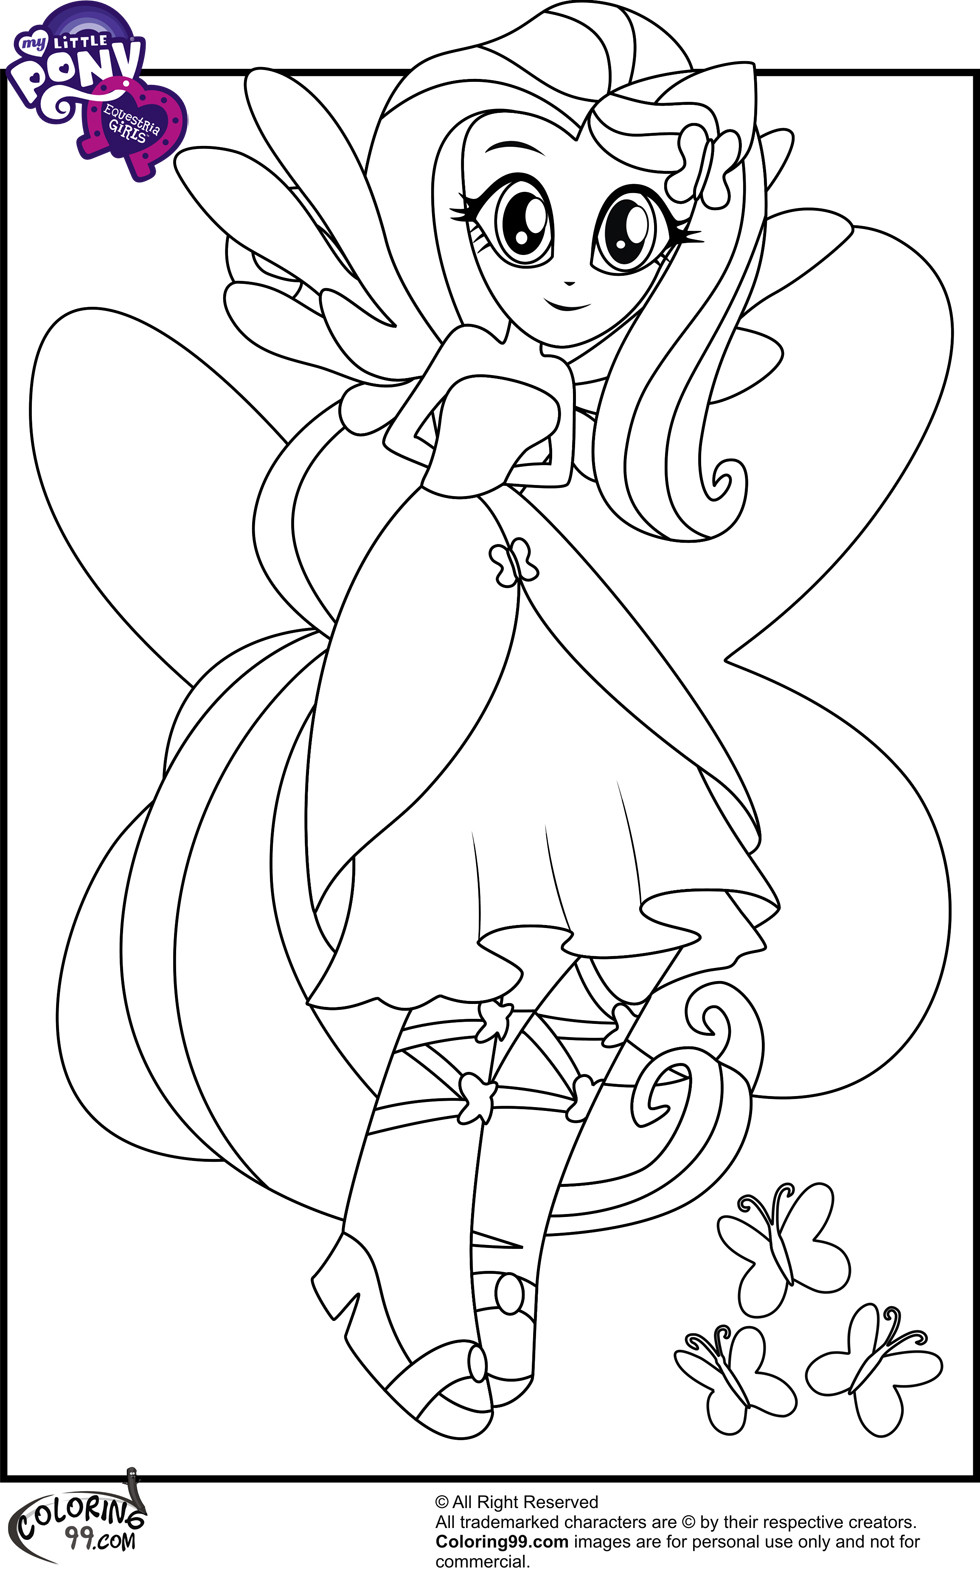 Equestria Girls Rarity Coloring Pages
 My little pony Coloring pages